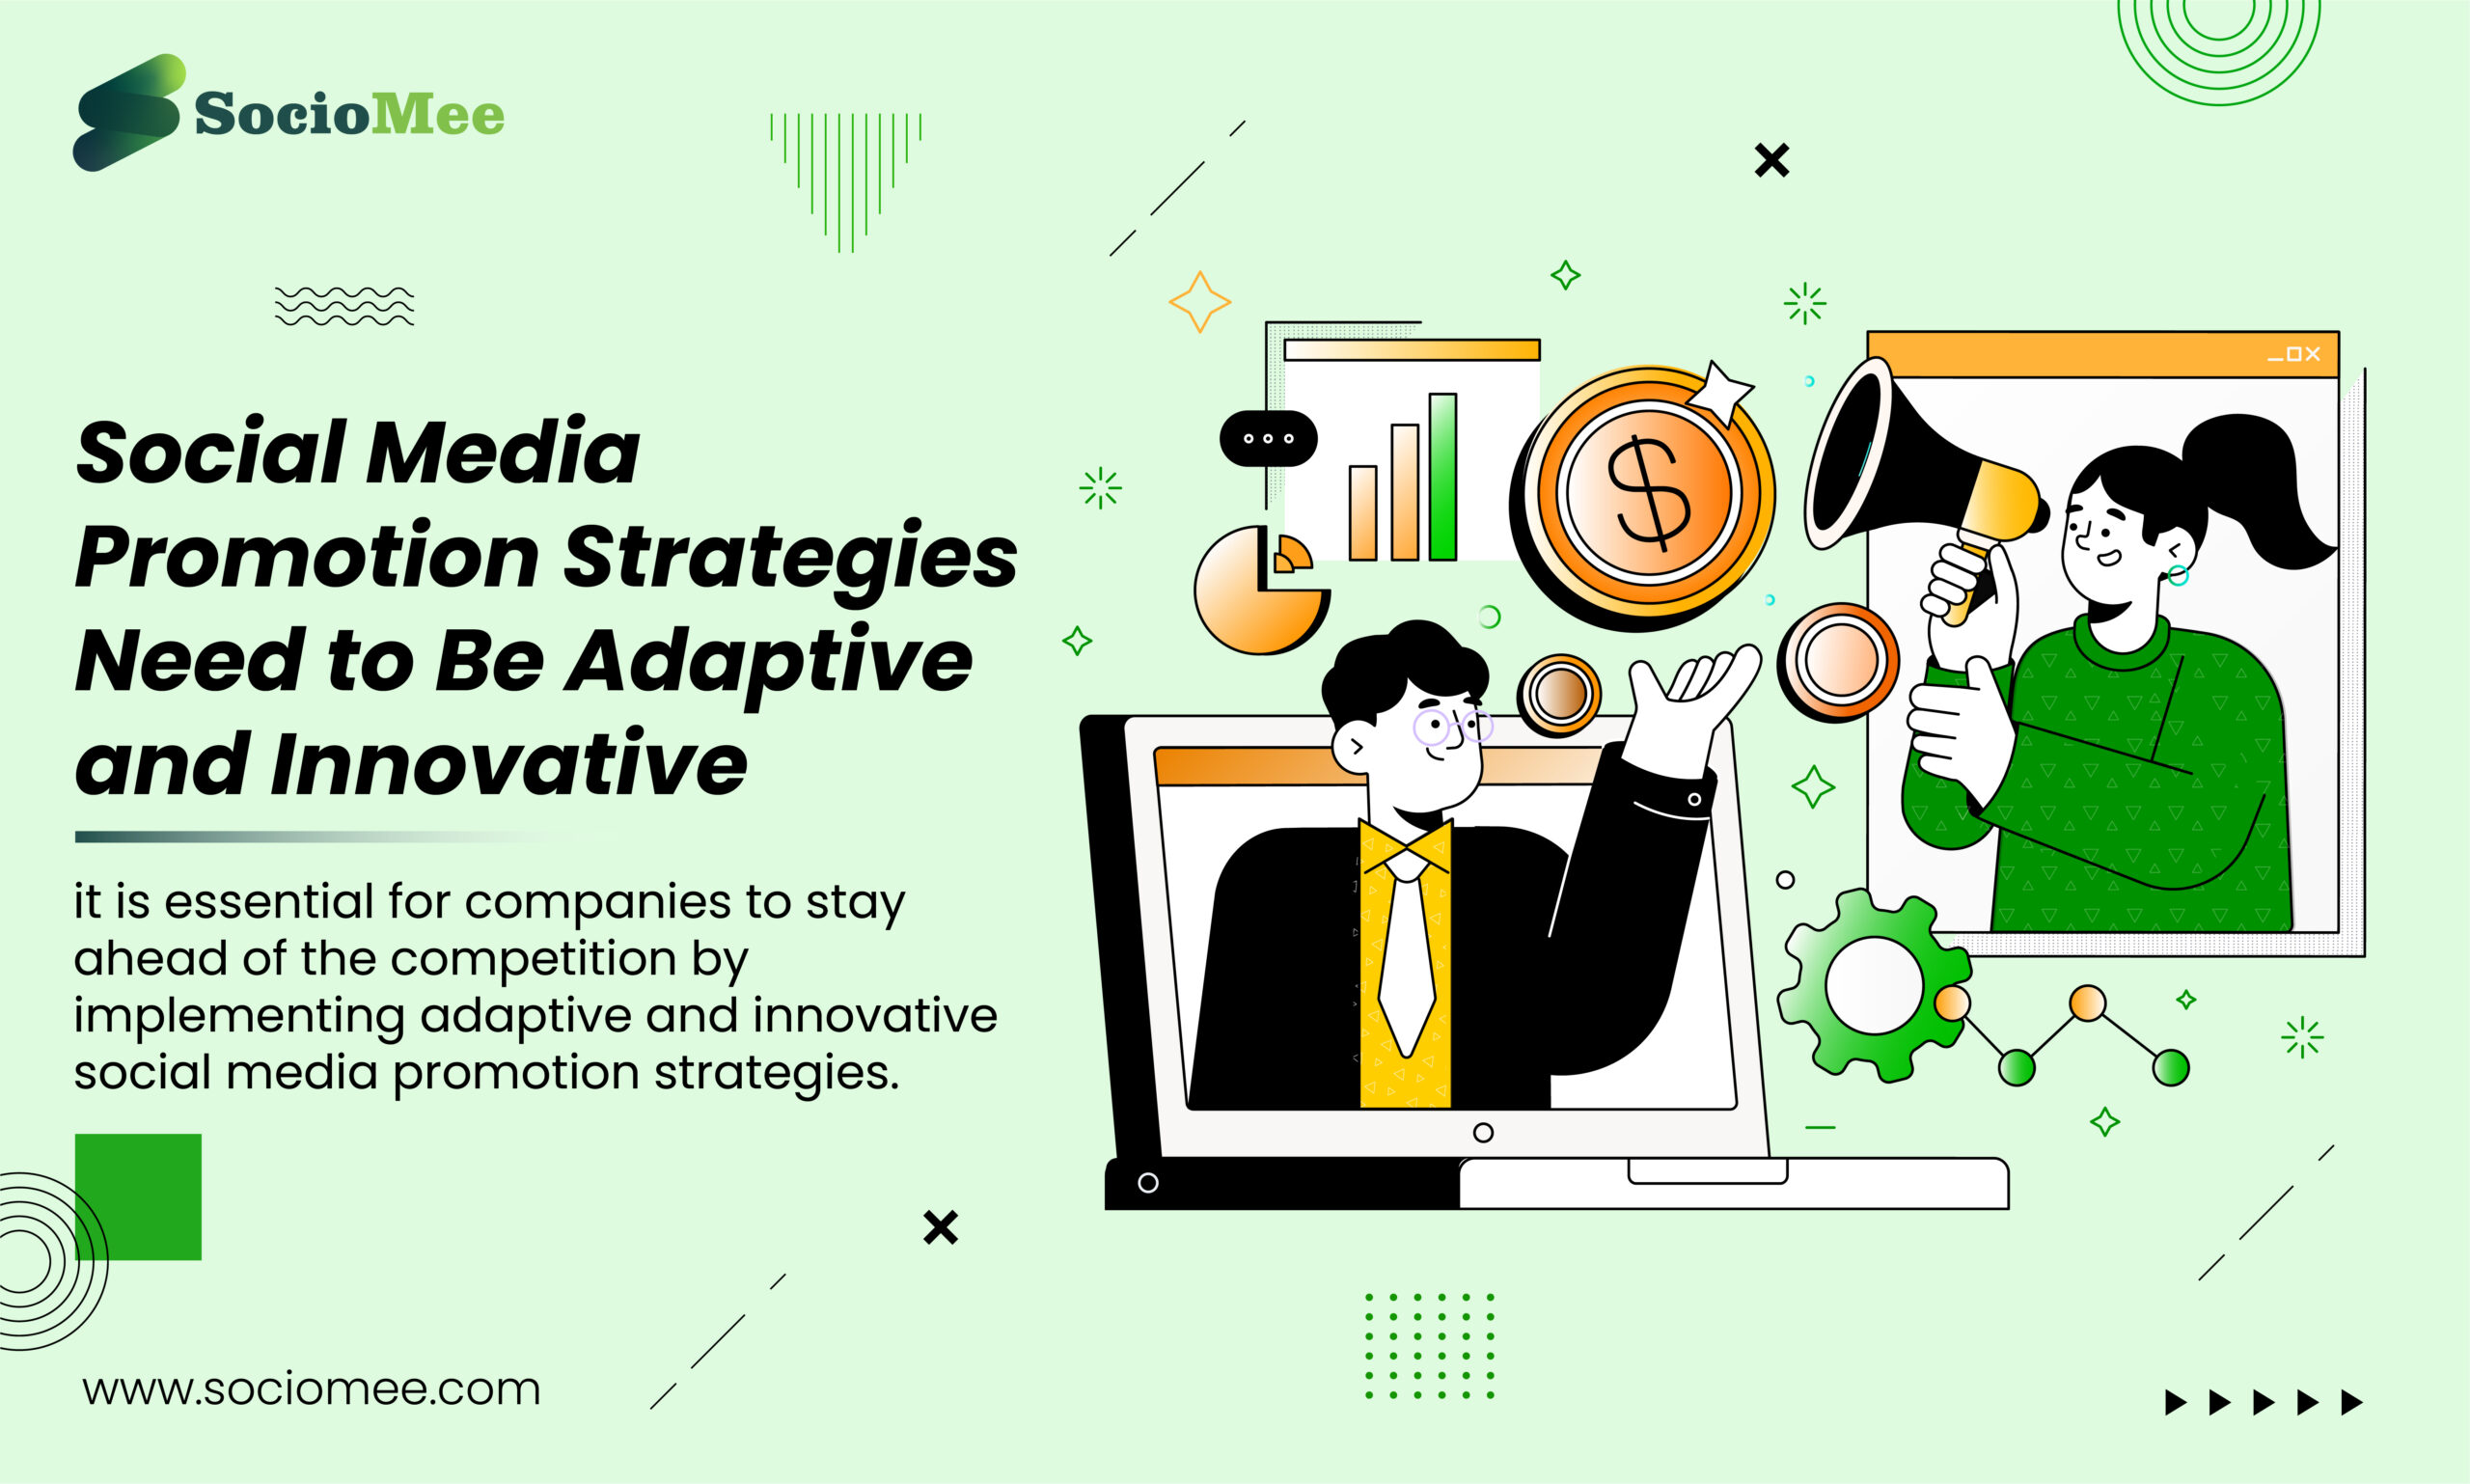 Why Your Social Media Promotion Strategies Need to Be Adaptive and Innovative